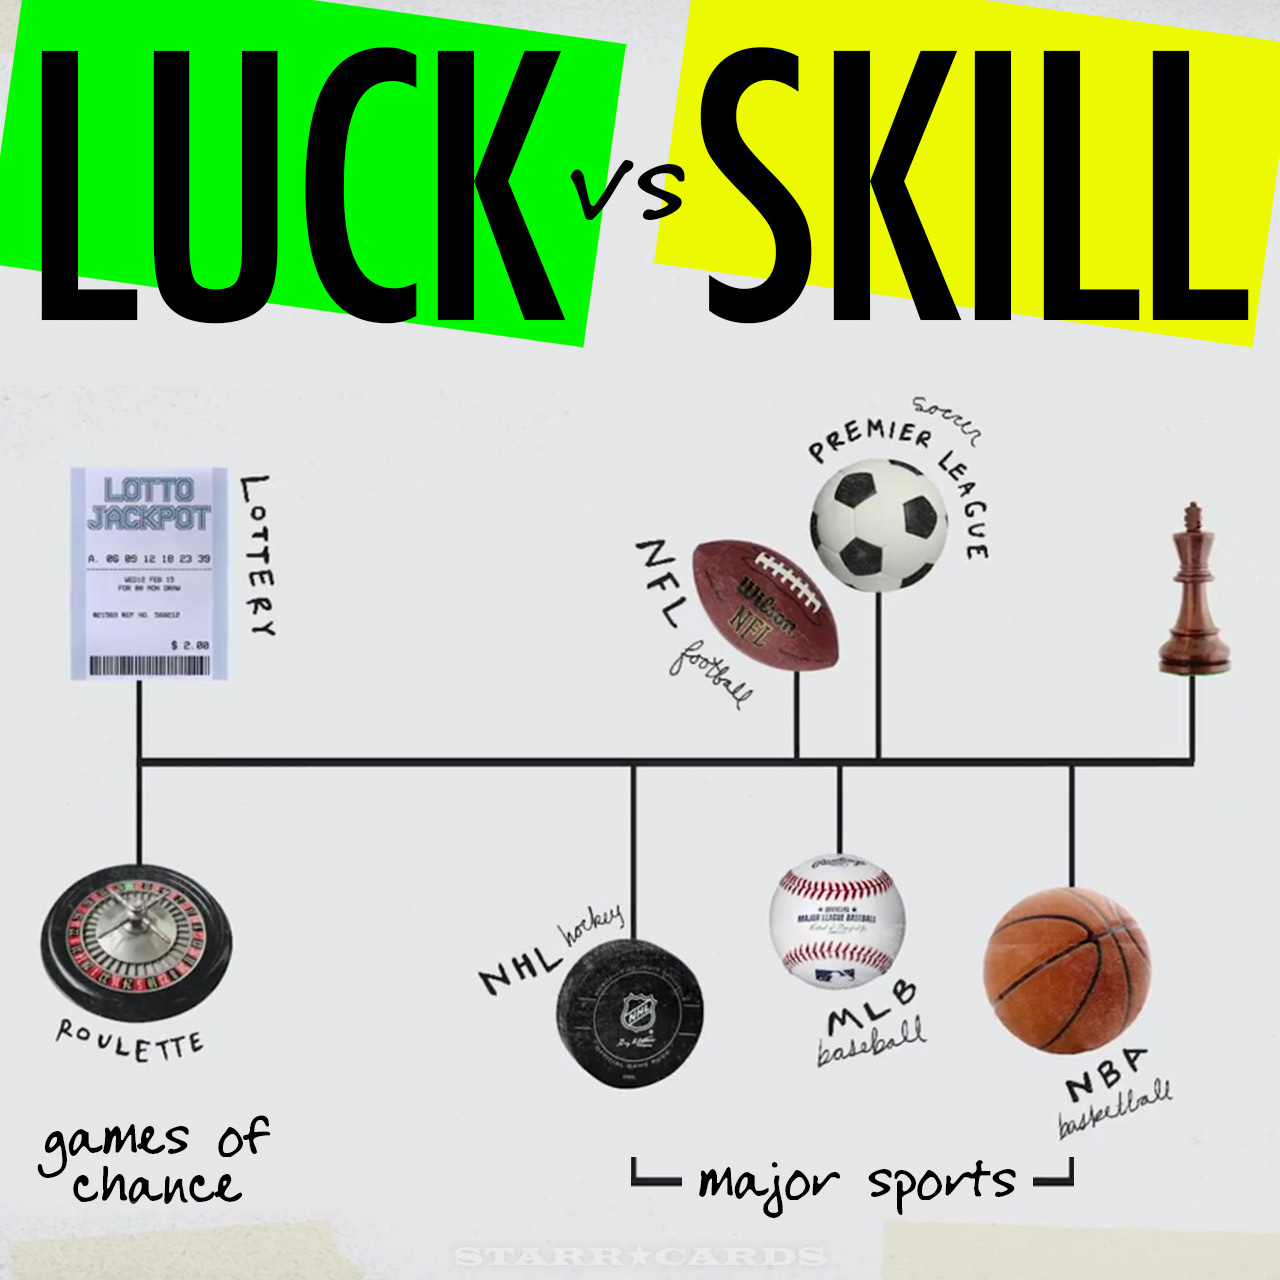 Luck vs Skill: Comparing the role of chance in the major sports